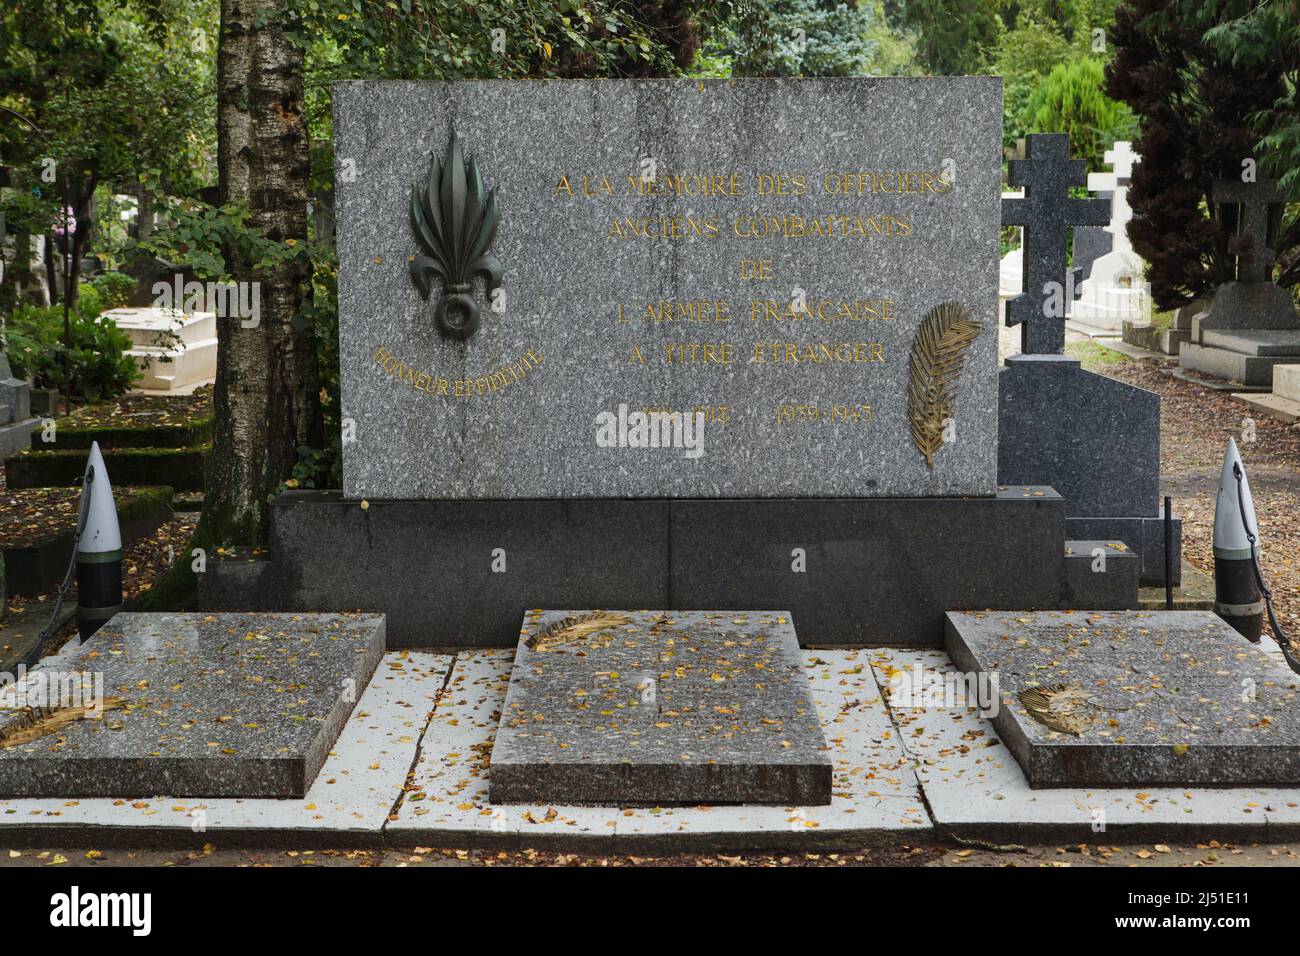 Graves of Russian officers served in the French Army at the Russian Cemetery in Sainte-Geneviève-des-Bois (Cimetière russe de Sainte-Geneviève-des-Bois) near Paris, France. Russian-born French general and diplomat Zinovy Peshkov (Zinovi Pechkoff) is buried here among others. Stock Photo